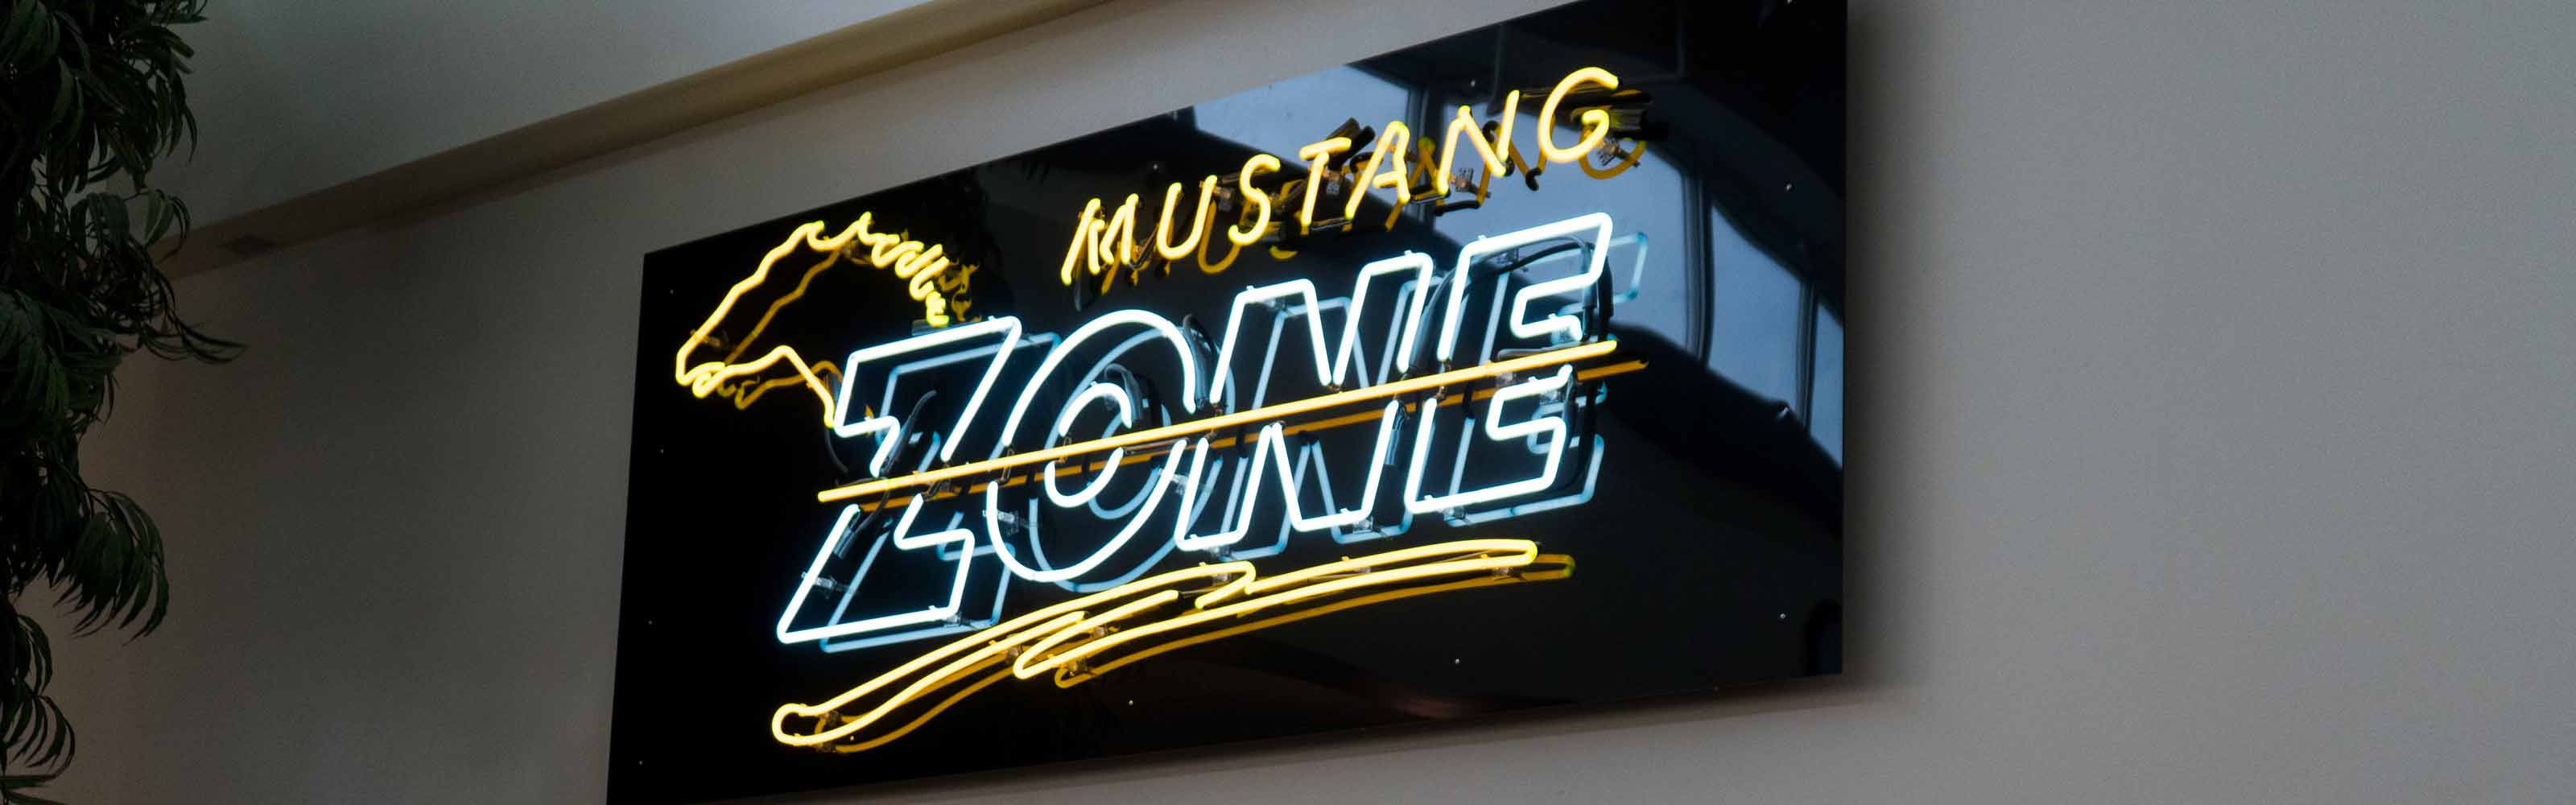 Mustang Zone Sign